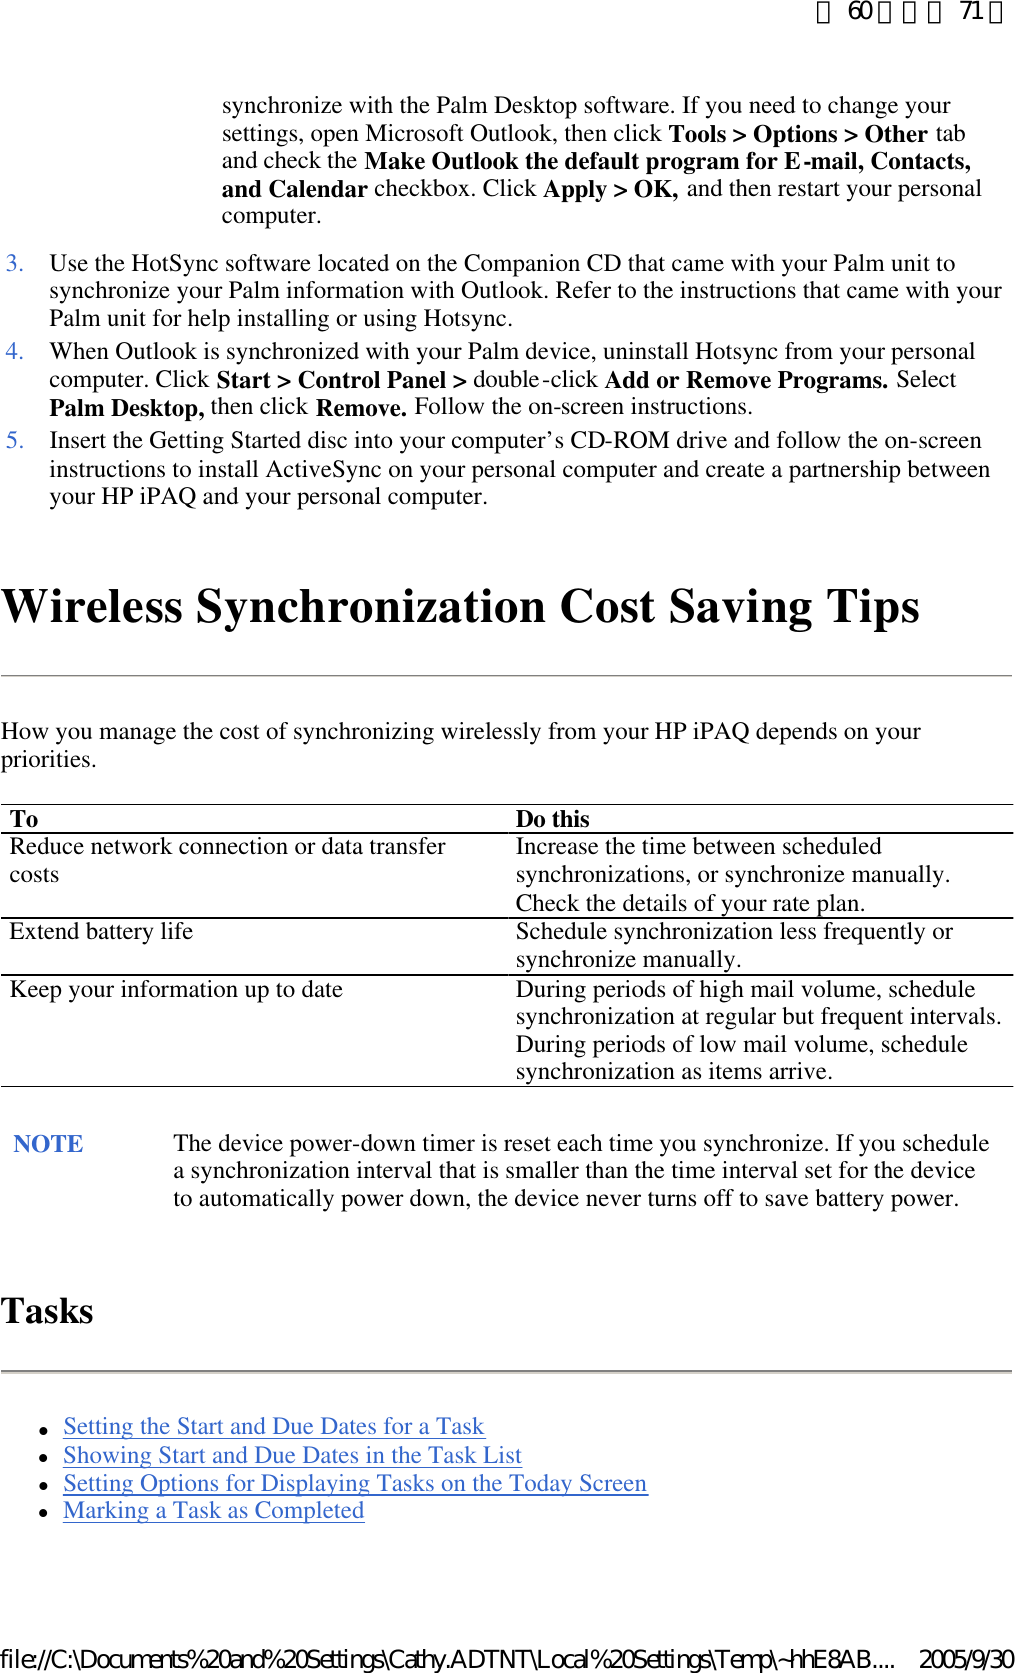 Wireless Synchronization Cost Saving Tips How you manage the cost of synchronizing wirelessly from your HP iPAQ depends on your priorities. Tasks lSetting the Start and Due Dates for a Task  lShowing Start and Due Dates in the Task List  lSetting Options for Displaying Tasks on the Today Screen  lMarking a Task as Completed  synchronize with the Palm Desktop software. If you need to change your settings, open Microsoft Outlook, then click Tools &gt; Options &gt; Other tab and check the Make Outlook the default program for E-mail, Contacts, and Calendar checkbox. Click Apply &gt; OK, and then restart your personal computer.  3. Use the HotSync software located on the Companion CD that came with your Palm unit to synchronize your Palm information with Outlook. Refer to the instructions that came with your Palm unit for help installing or using Hotsync. 4. When Outlook is synchronized with your Palm device, uninstall Hotsync from your personal computer. Click Start &gt; Control Panel &gt; double-click Add or Remove Programs. Select Palm Desktop, then click Remove. Follow the on-screen instructions. 5. Insert the Getting Started disc into your computer’s CD-ROM drive and follow the on-screen instructions to install ActiveSync on your personal computer and create a partnership between your HP iPAQ and your personal computer. To Do this Reduce network connection or data transfer costs  Increase the time between scheduled synchronizations, or synchronize manually. Check the details of your rate plan. Extend battery life Schedule synchronization less frequently or synchronize manually. Keep your information up to date During periods of high mail volume, schedule synchronization at regular but frequent intervals. During periods of low mail volume, schedule synchronization as items arrive. NOTE The device power-down timer is reset each time you synchronize. If you schedule a synchronization interval that is smaller than the time interval set for the device to automatically power down, the device never turns off to save battery power.  第 60 頁，共 71 頁2005/9/30file://C:\Documents%20and%20Settings\Cathy.ADTNT\Local%20Settings\Temp\~hhE8AB....